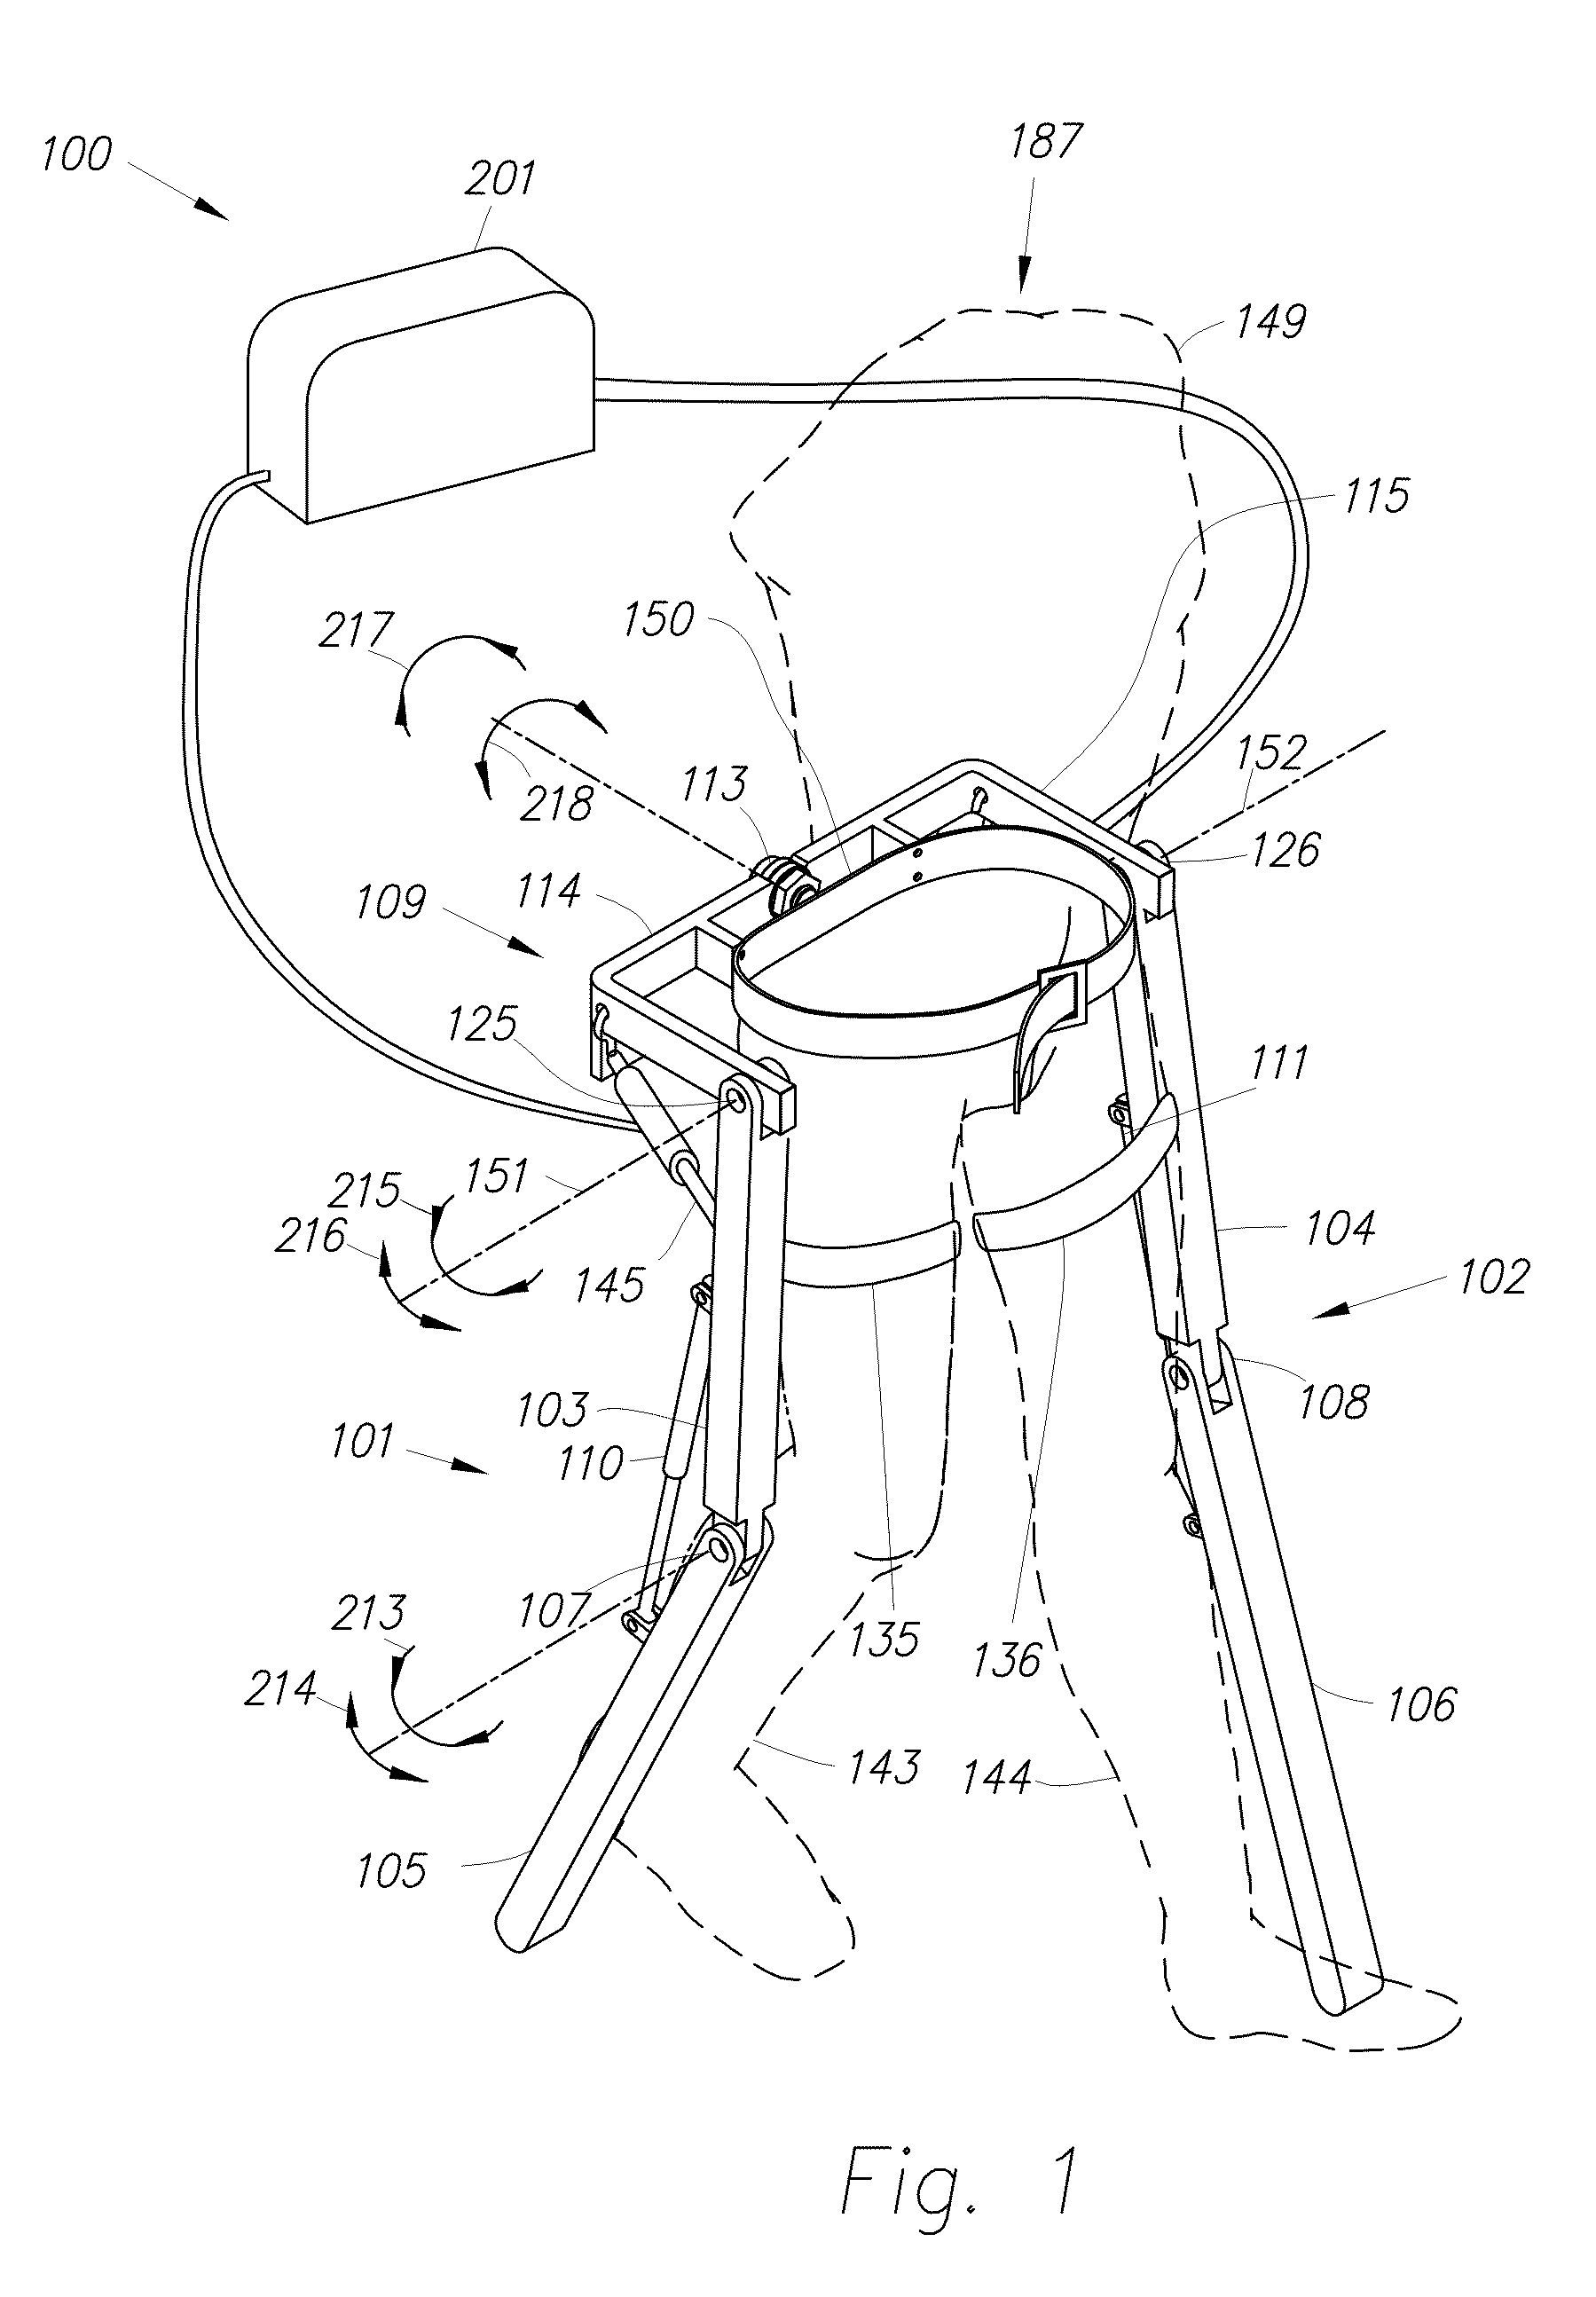 Device and method for decreasing oxygen consumption of a person during steady walking by use of a load-carrying exoskeleton